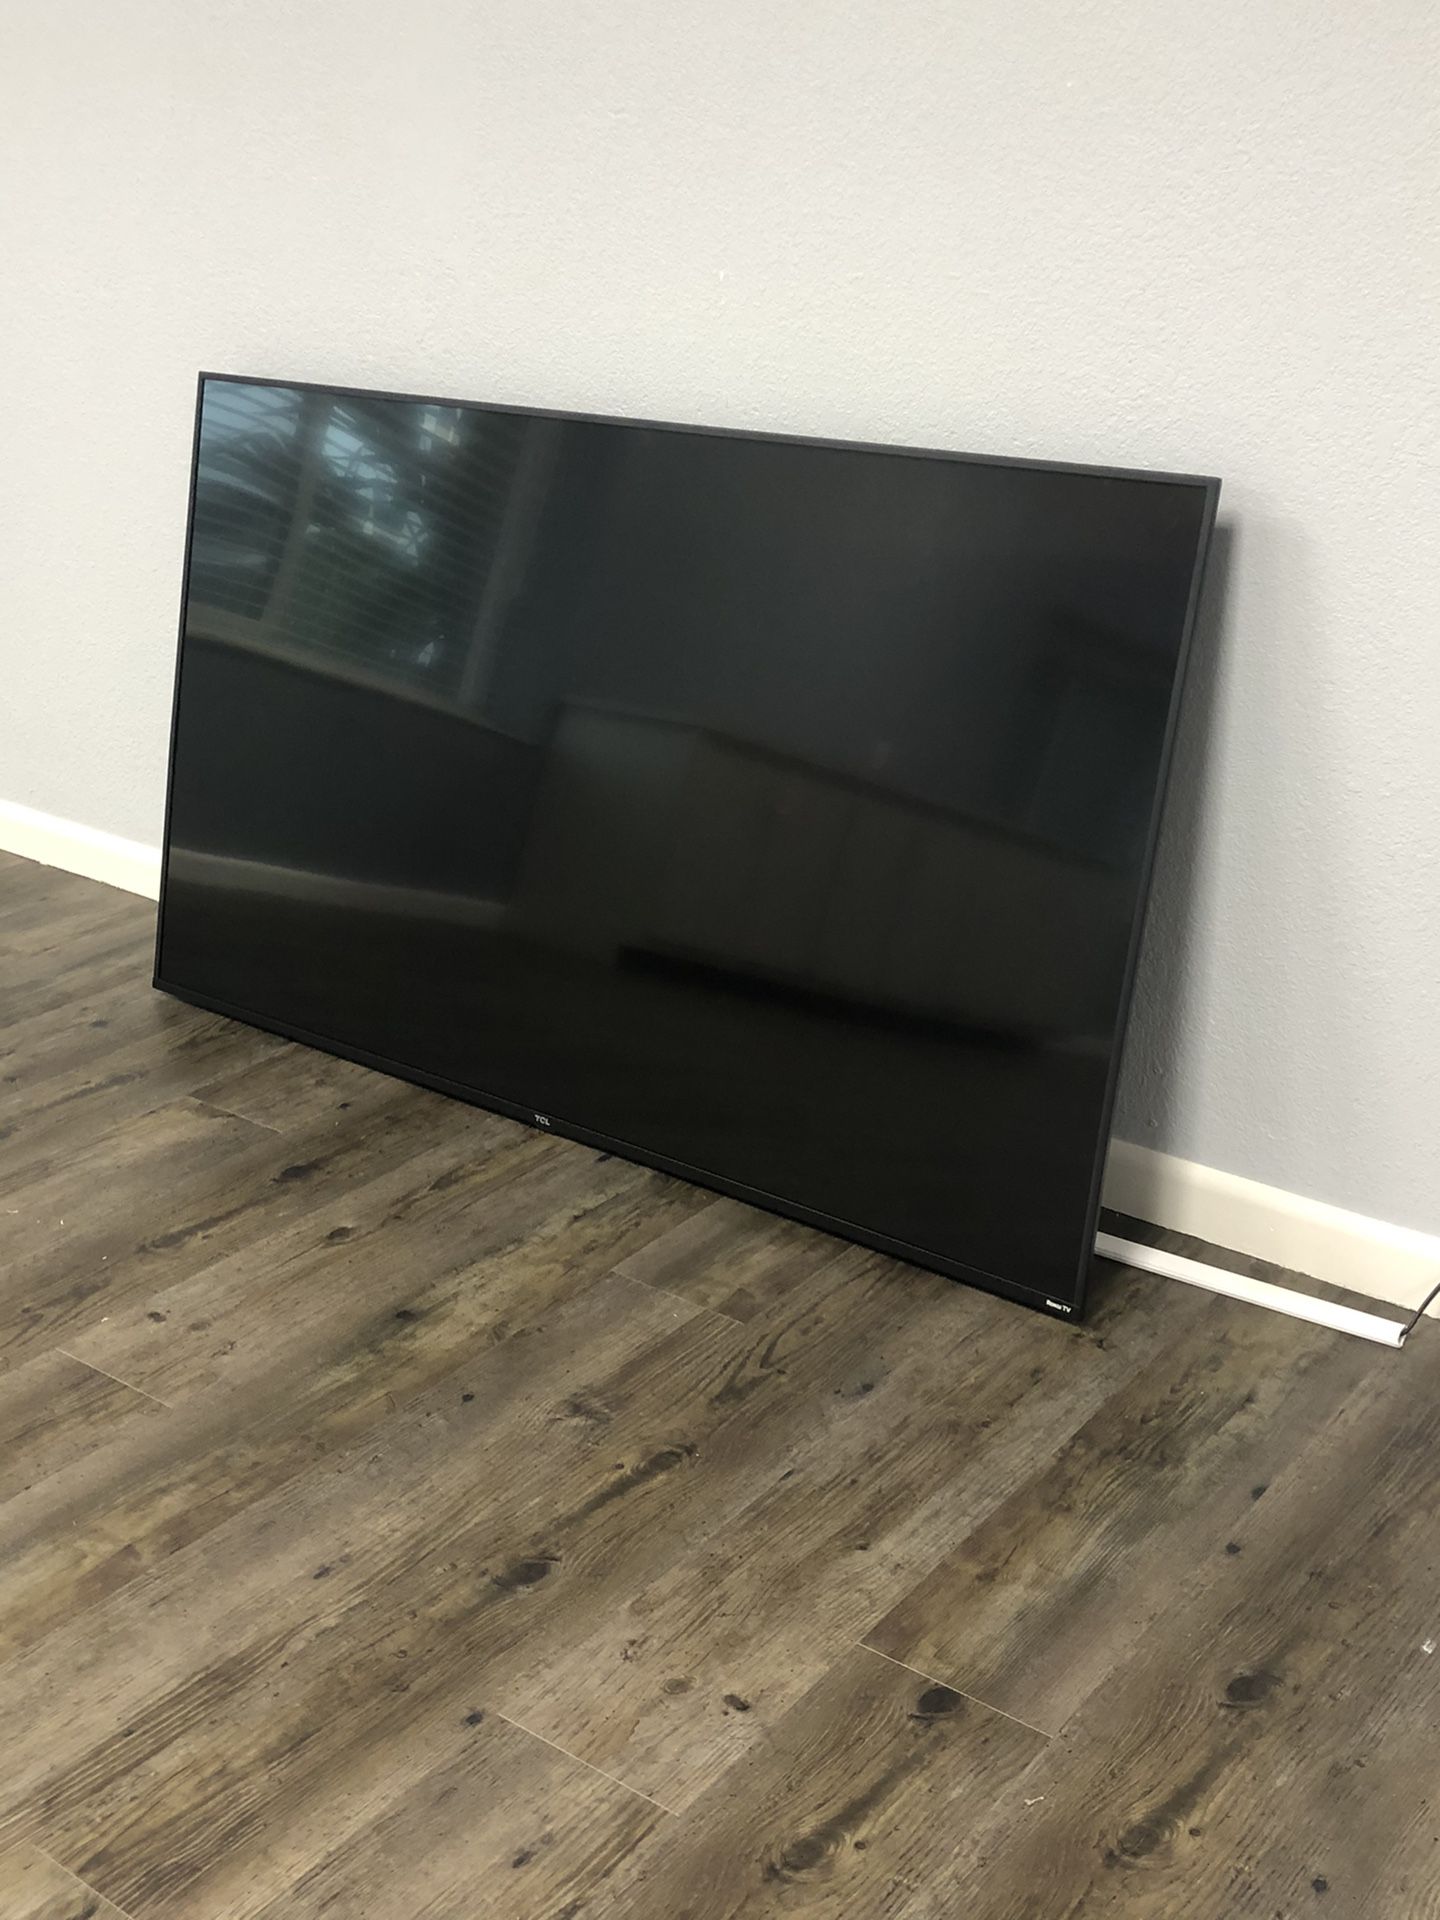 Brand new TCL 65 inch tv